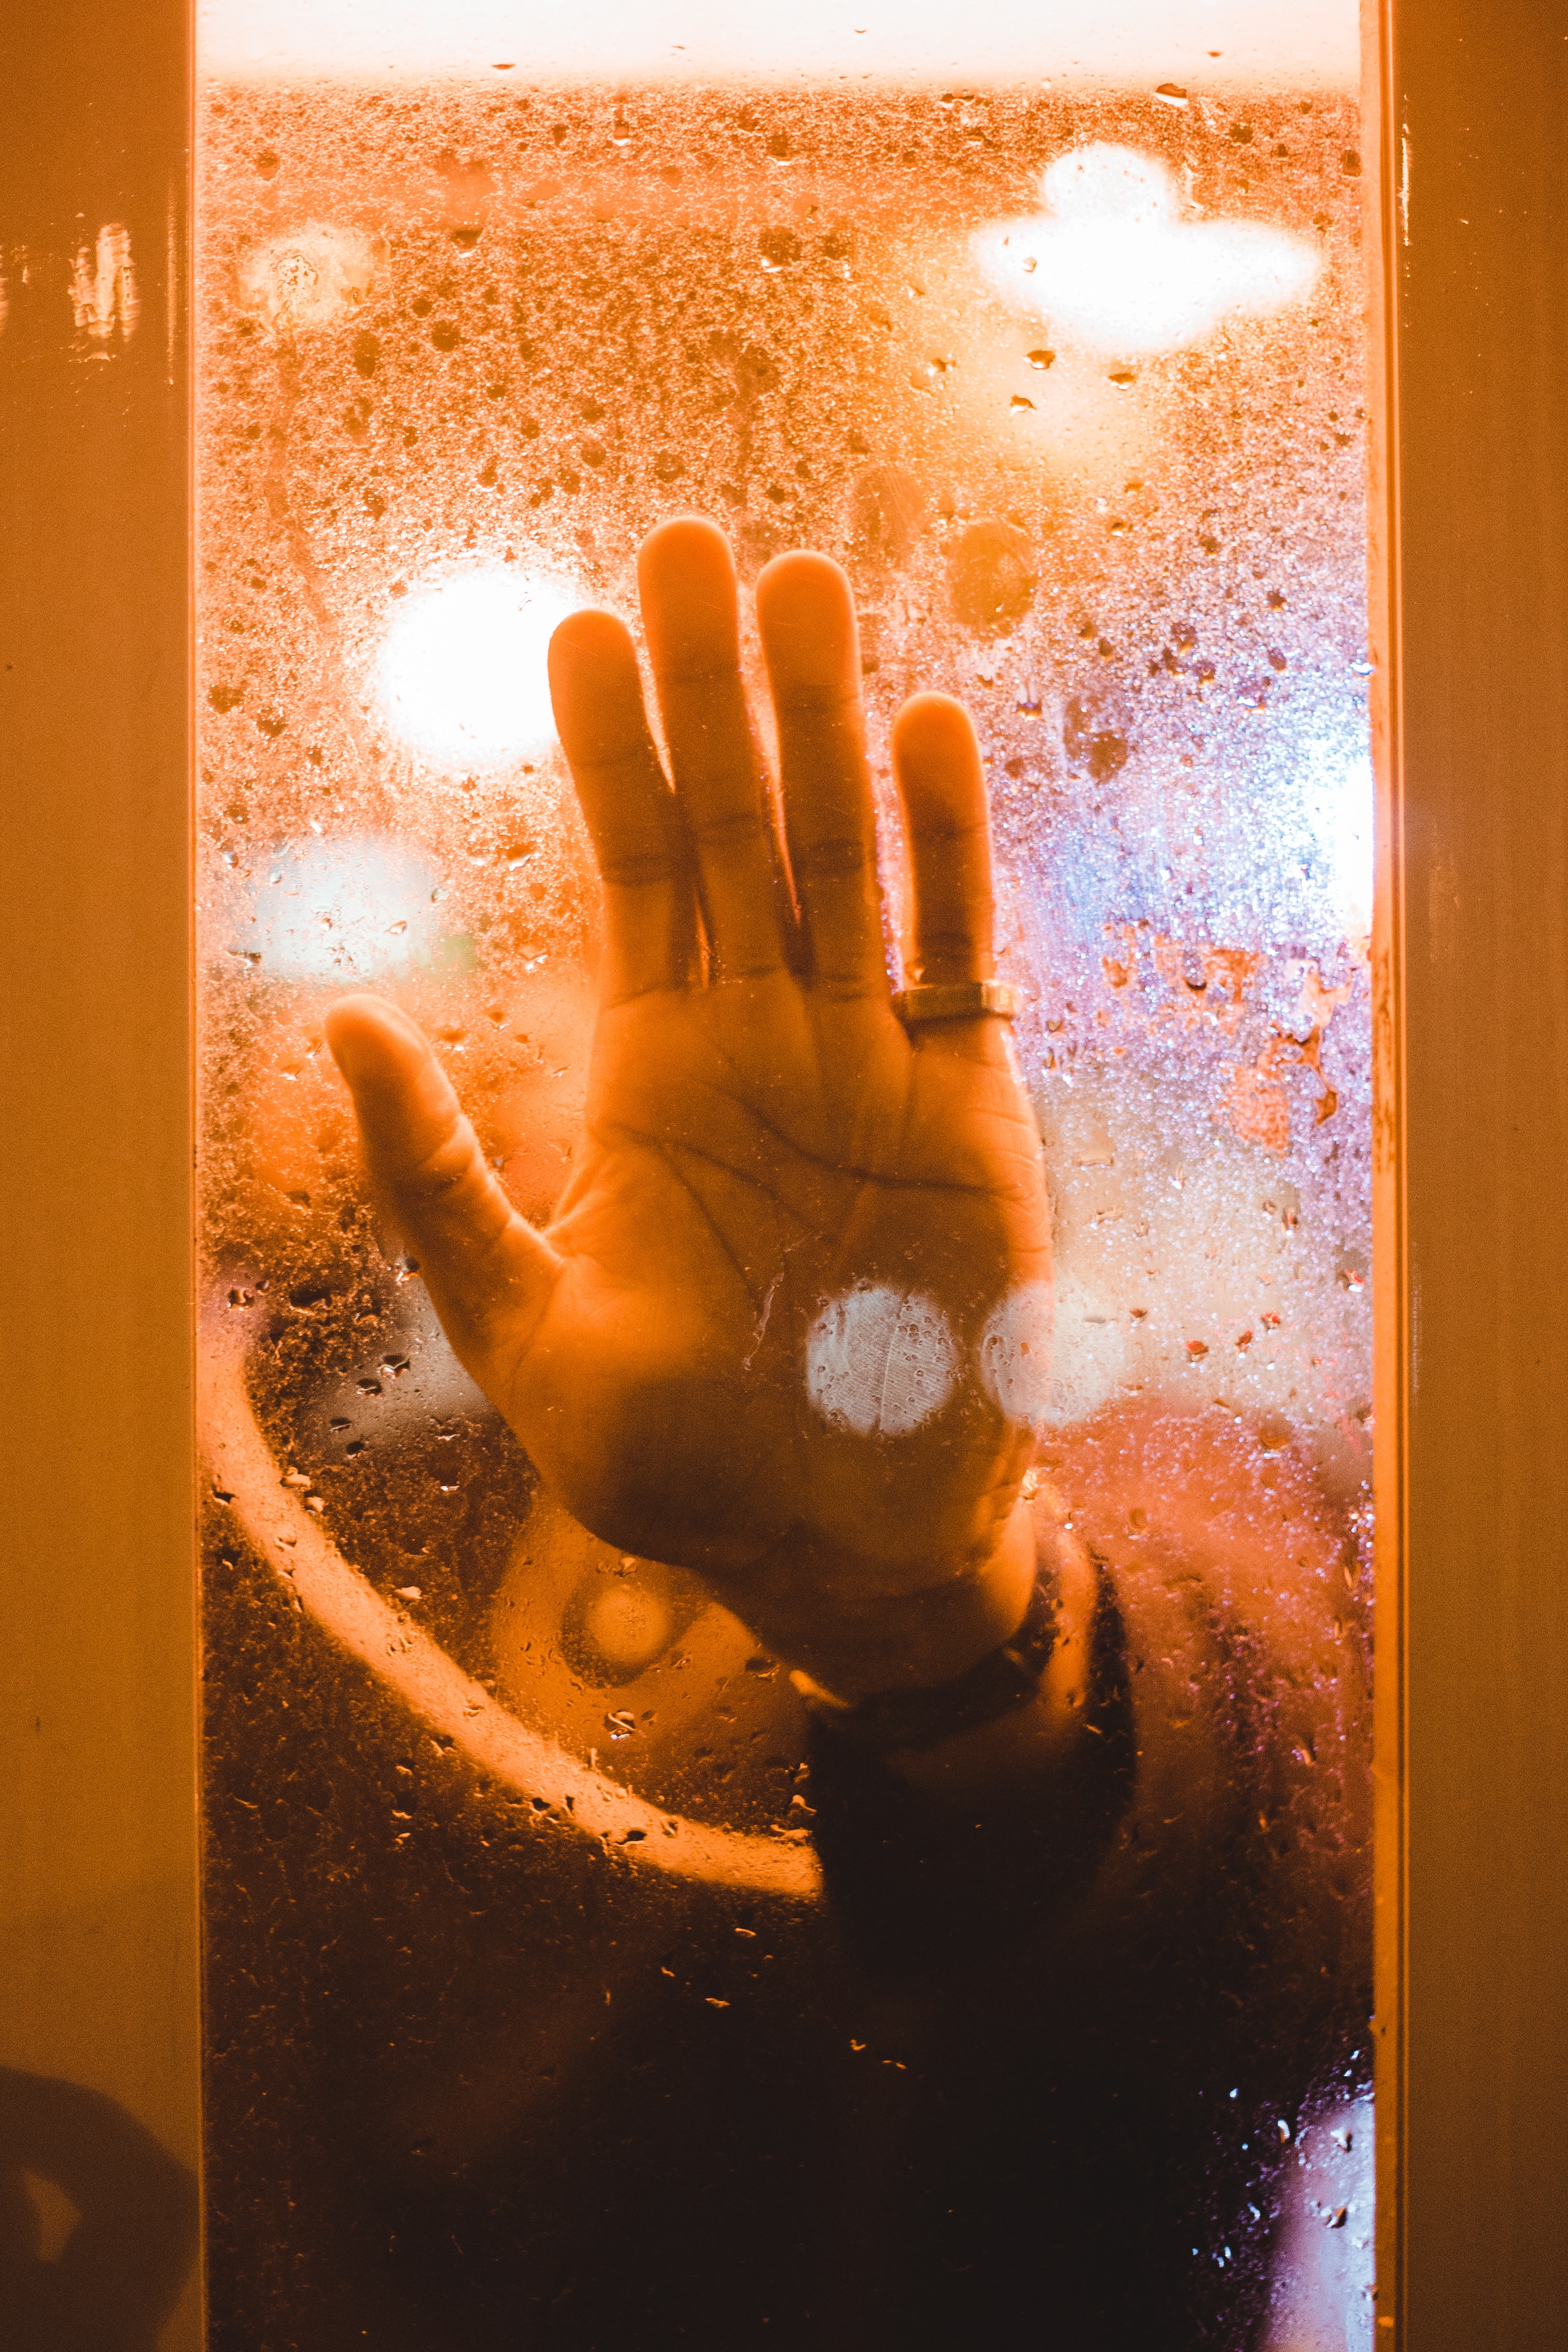 Windows Backgrounds miscellanea, hand, miscellaneous, wet, palm, glass, fogged up, weeping